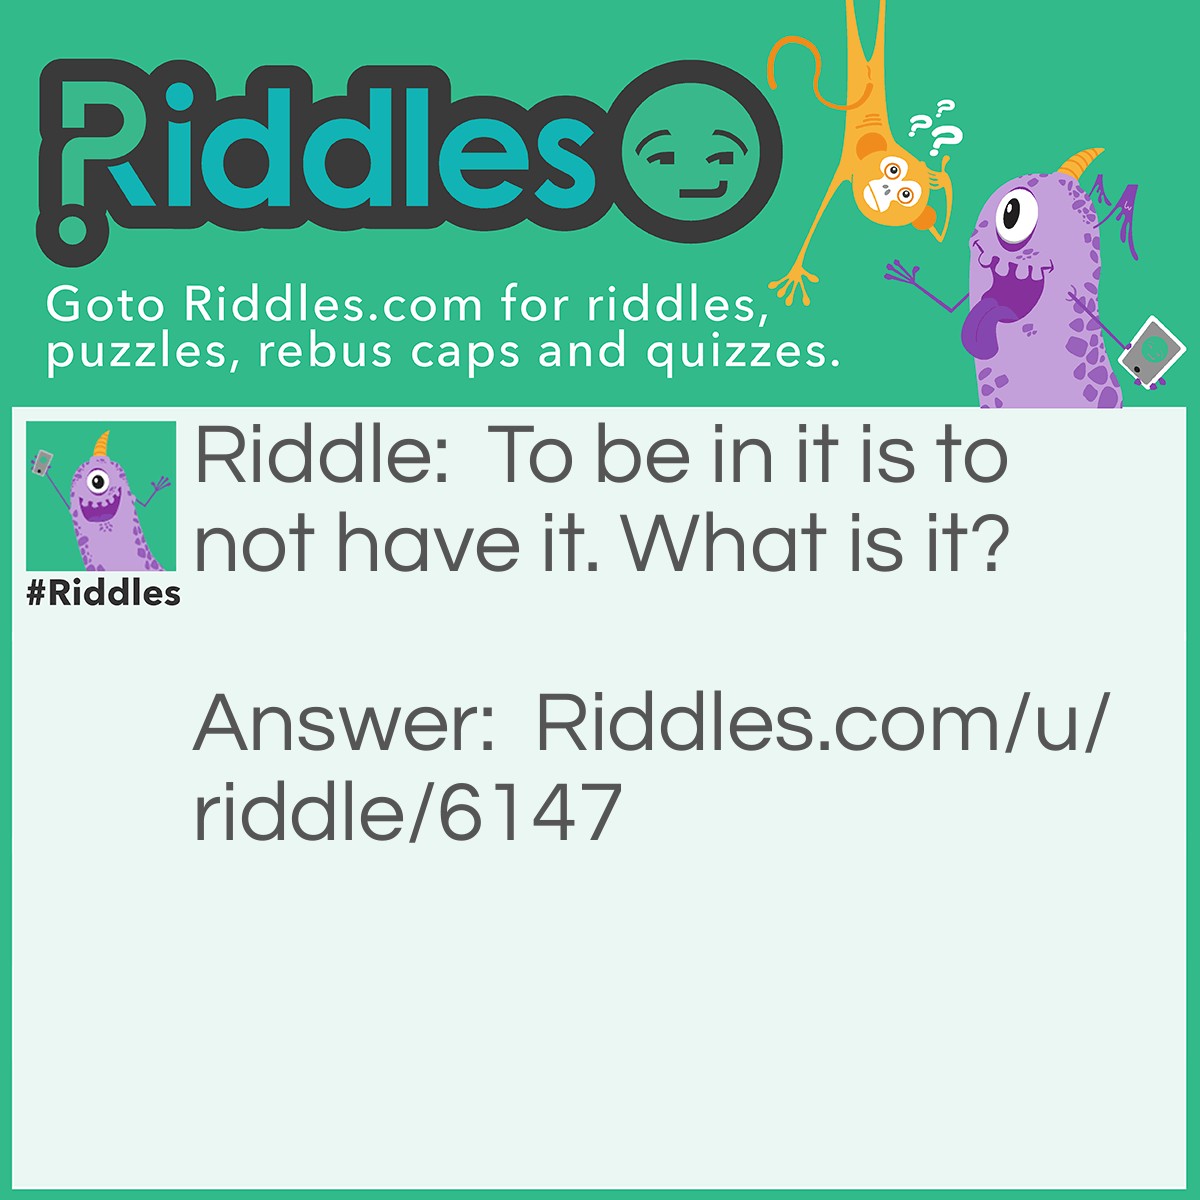 Riddle: To be in it is to not have it. What is it? Answer: Sanity.